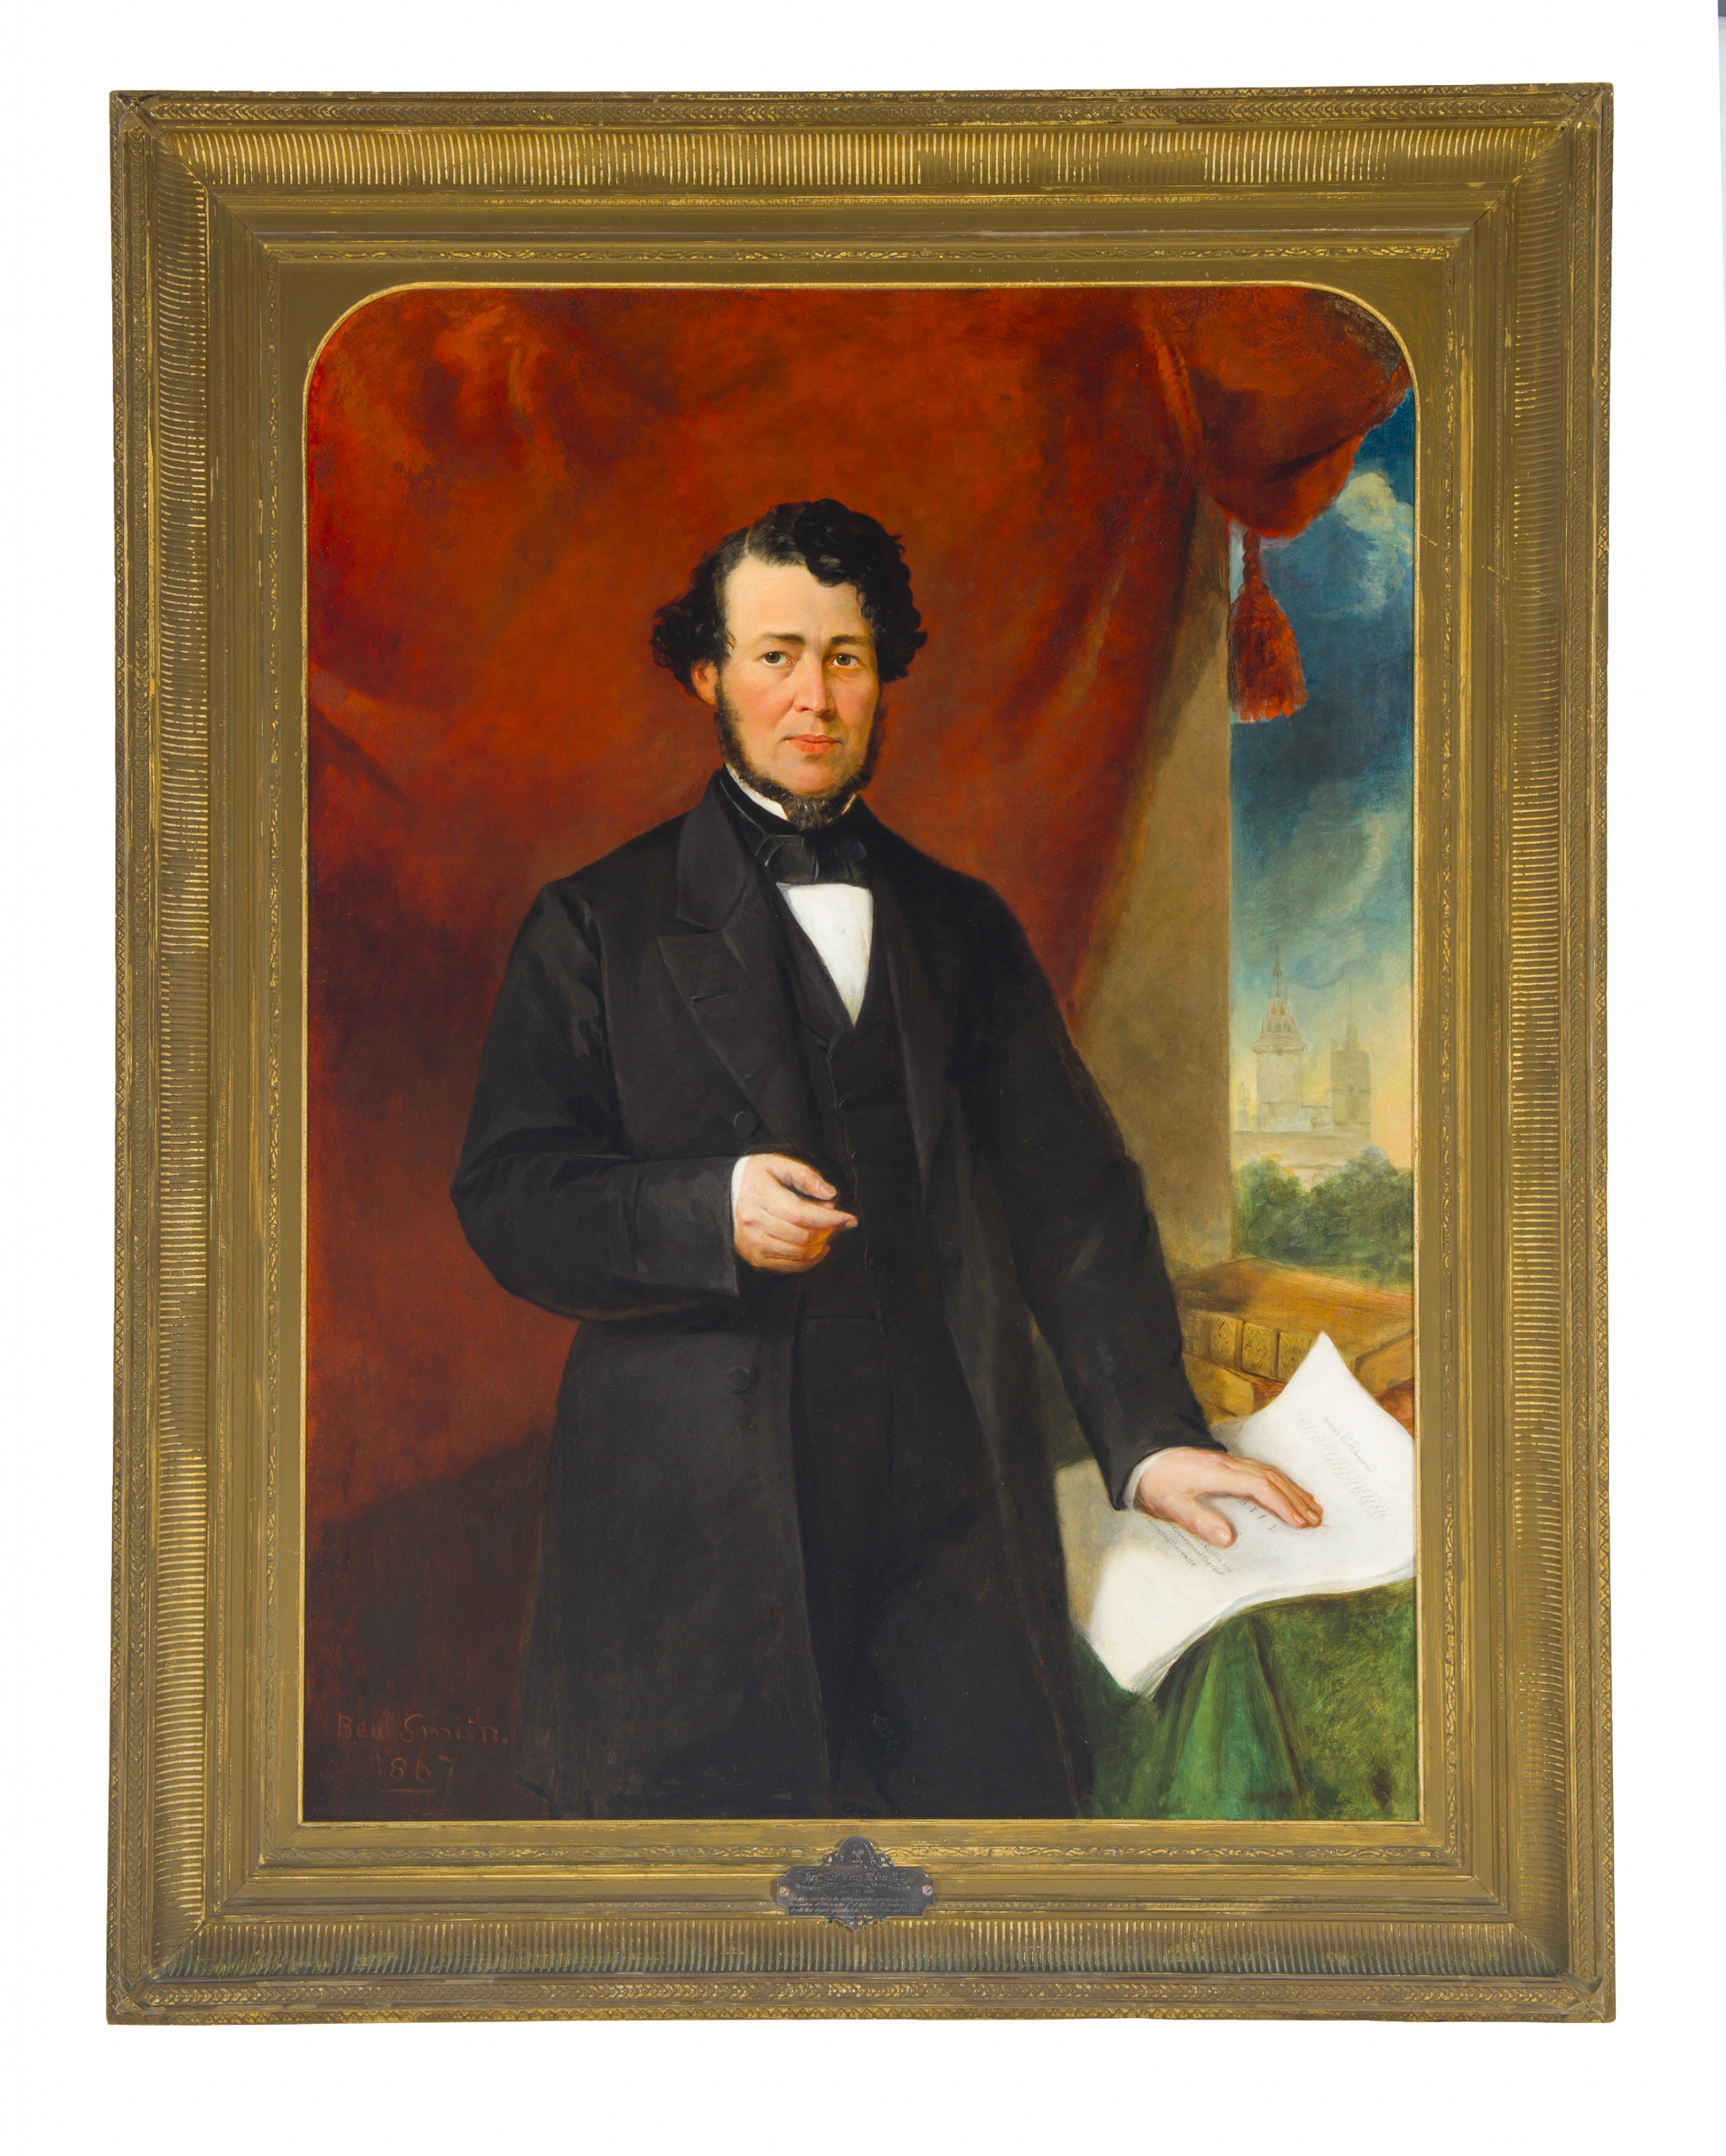 Painted portrait of a man with dark hair wearing a suit.